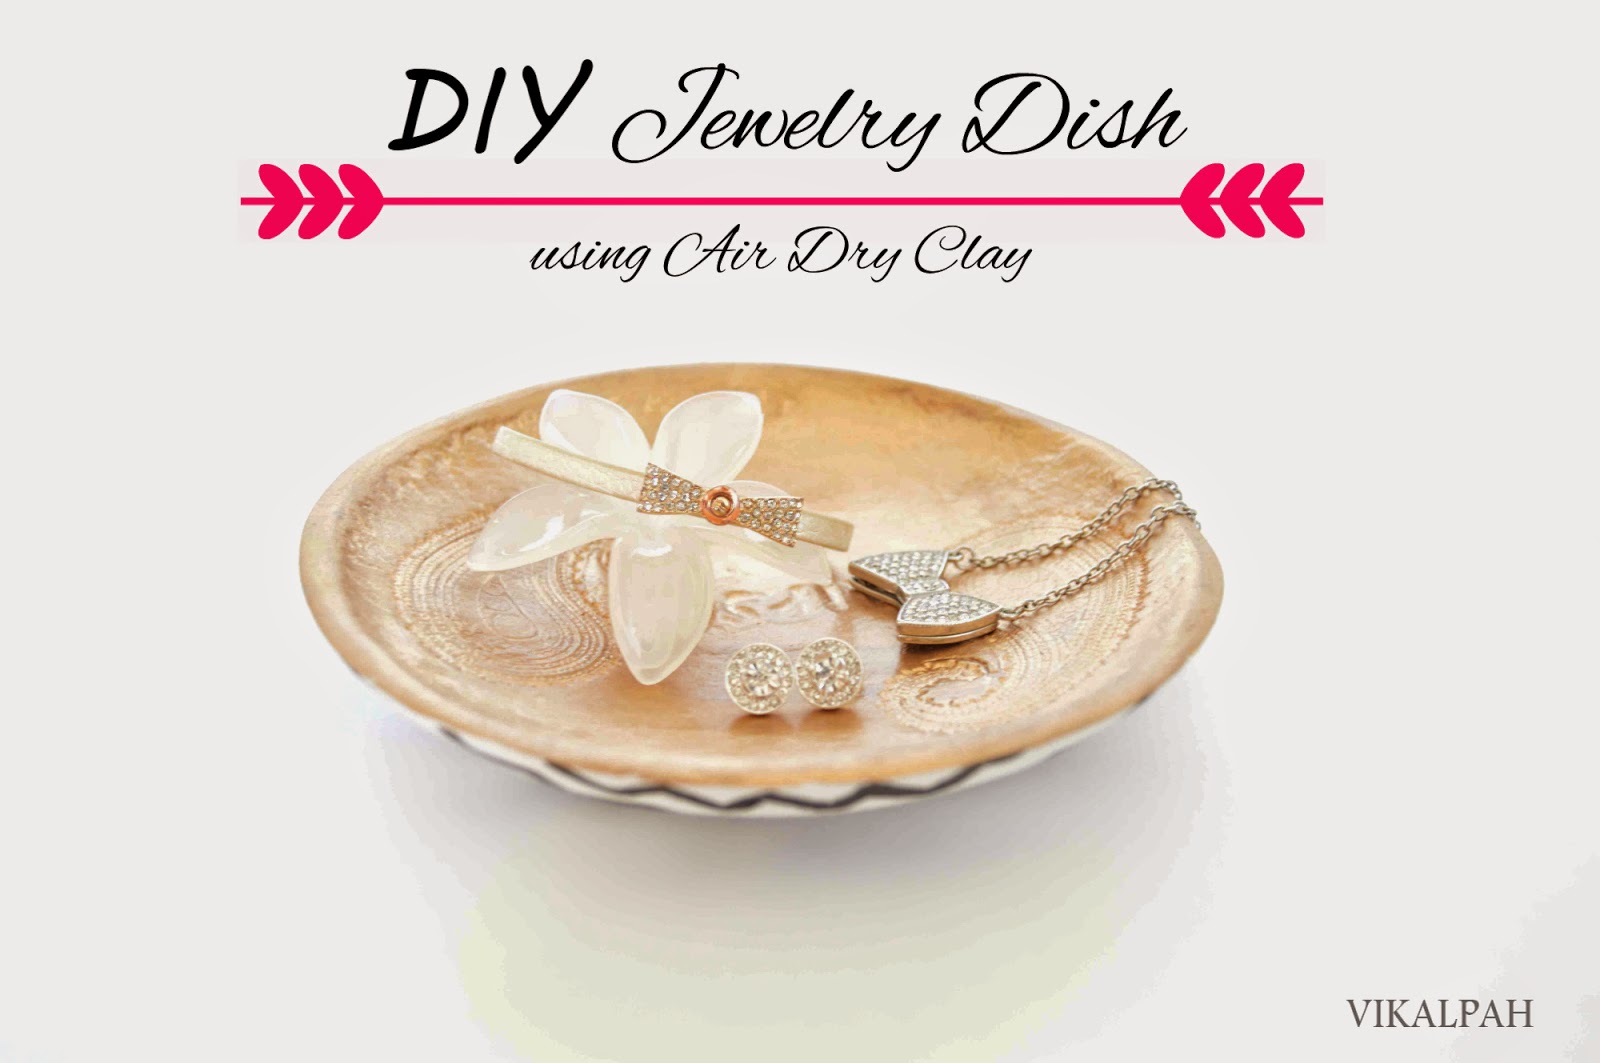 Pin on Air dry clay ideas